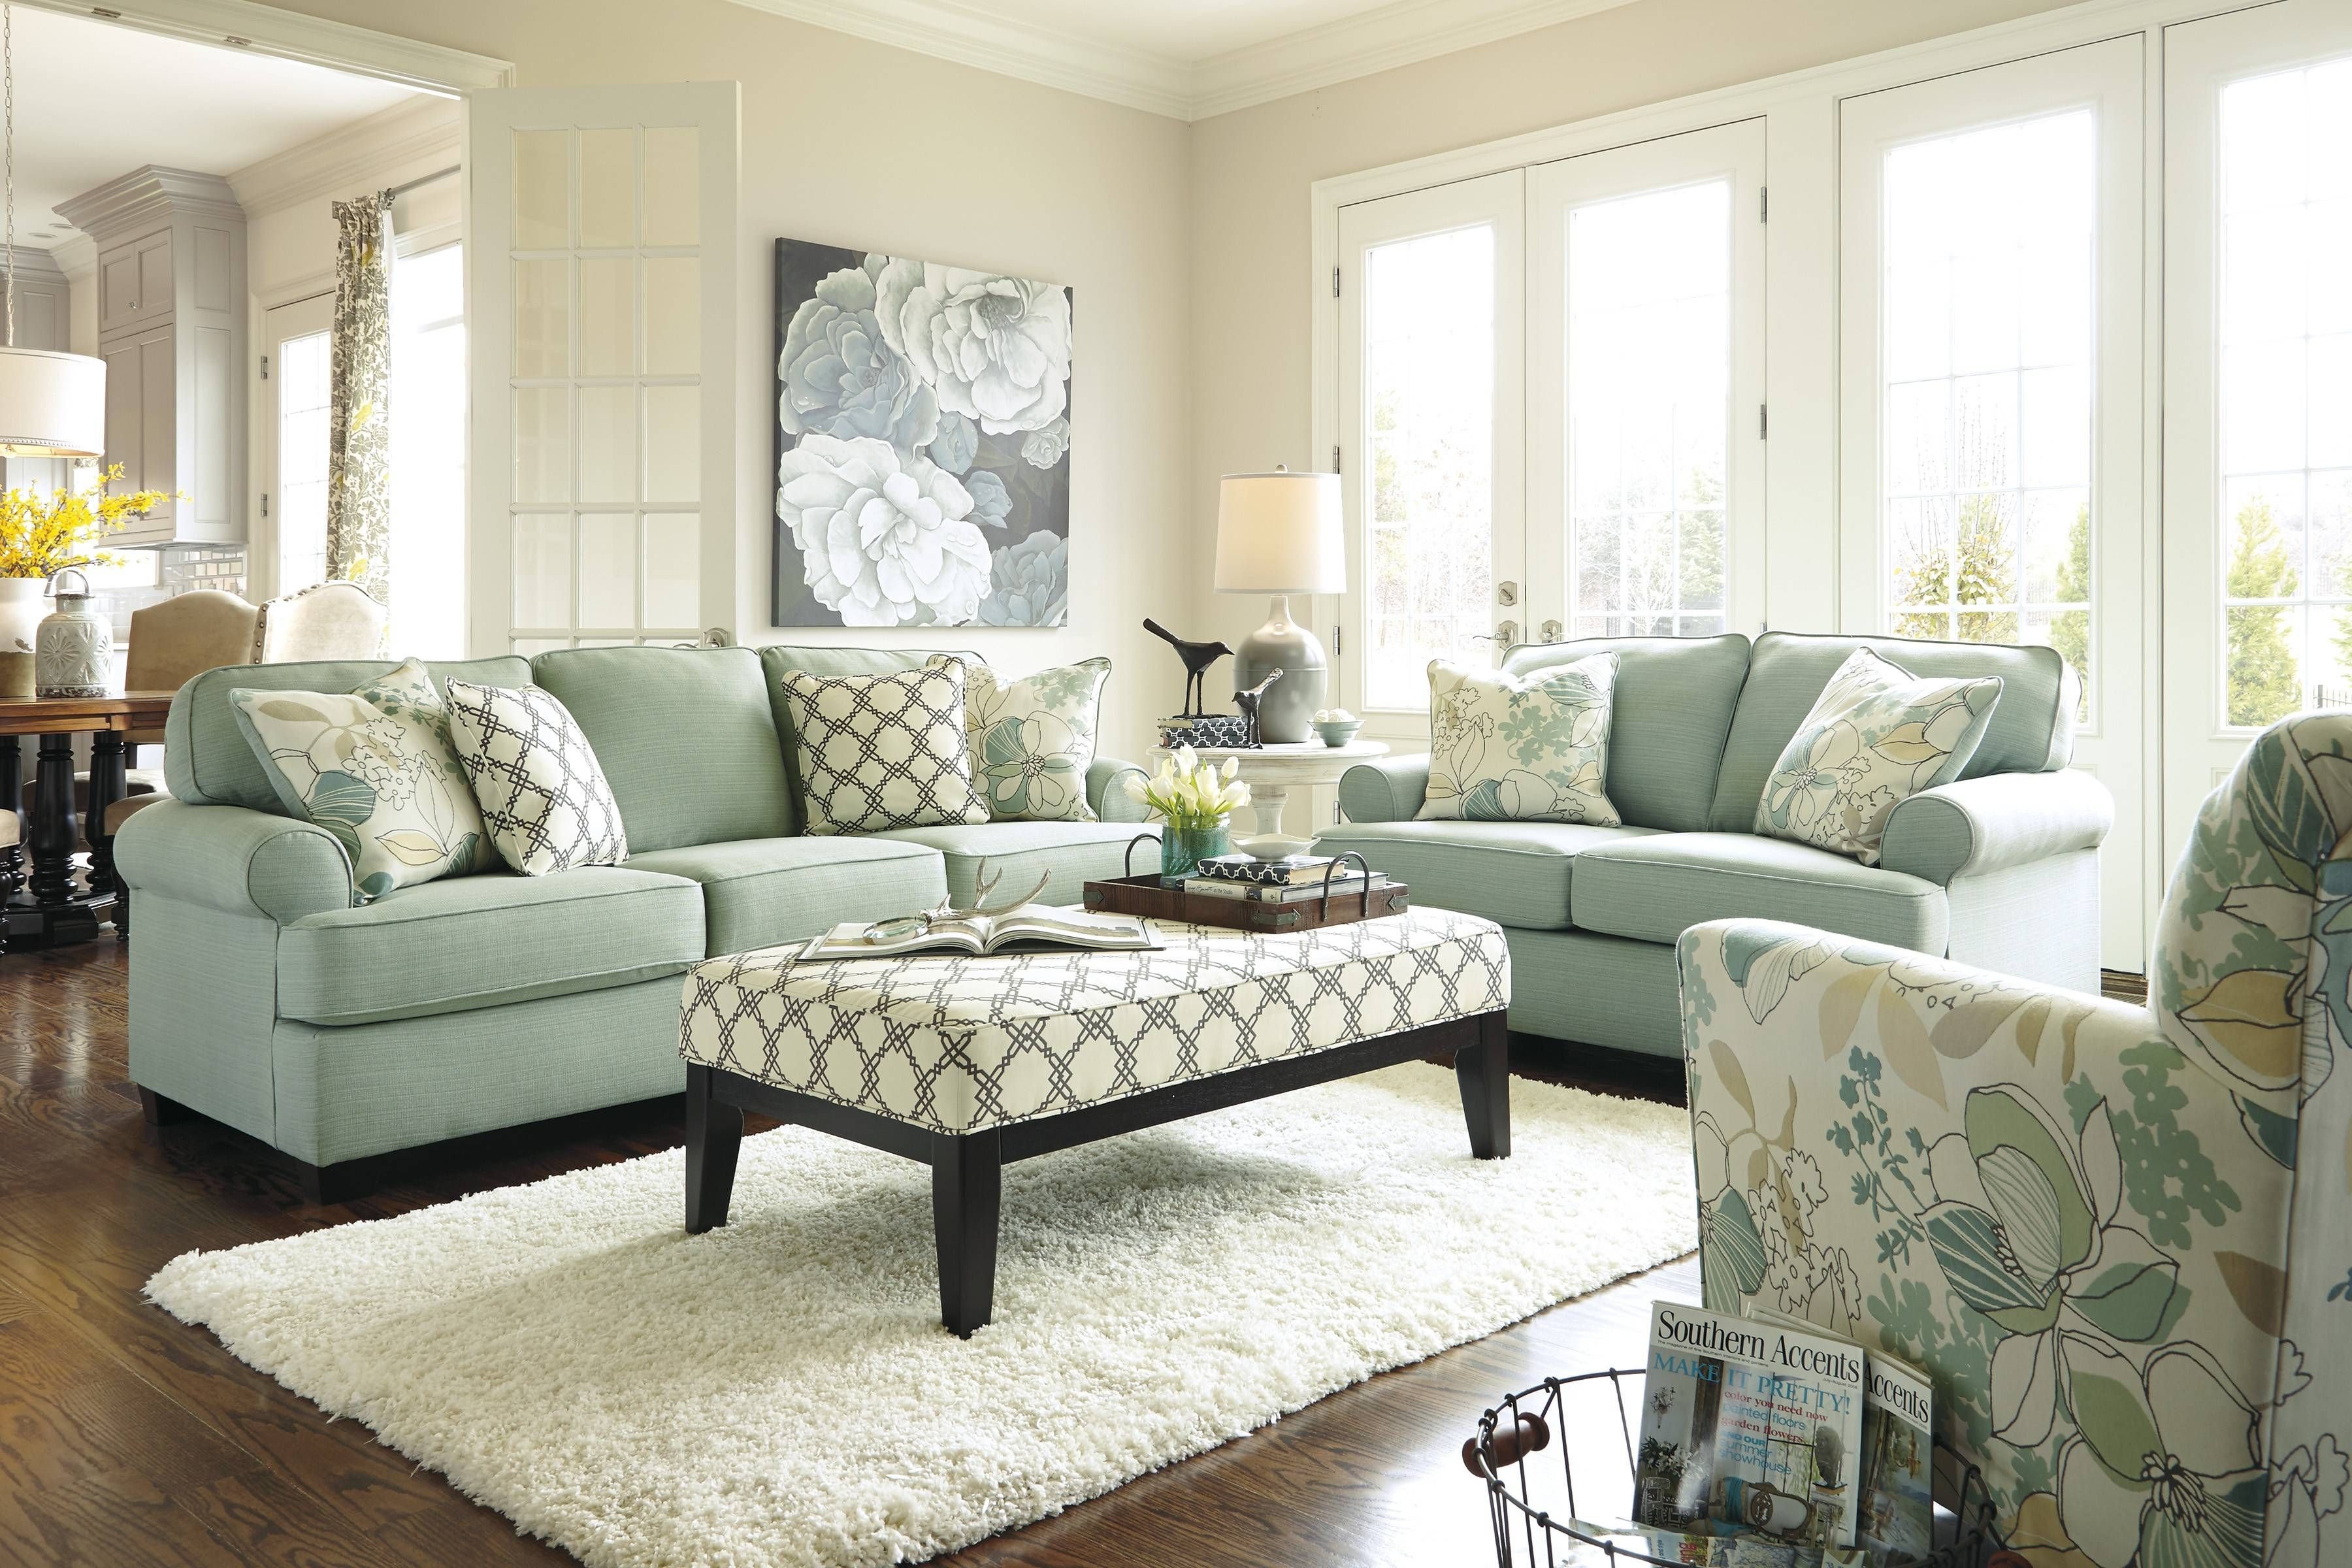 Buy Daystar – Seafoam Living Room Setsignature Design From Www With Regard To Seafoam Sofas (View 2 of 15)